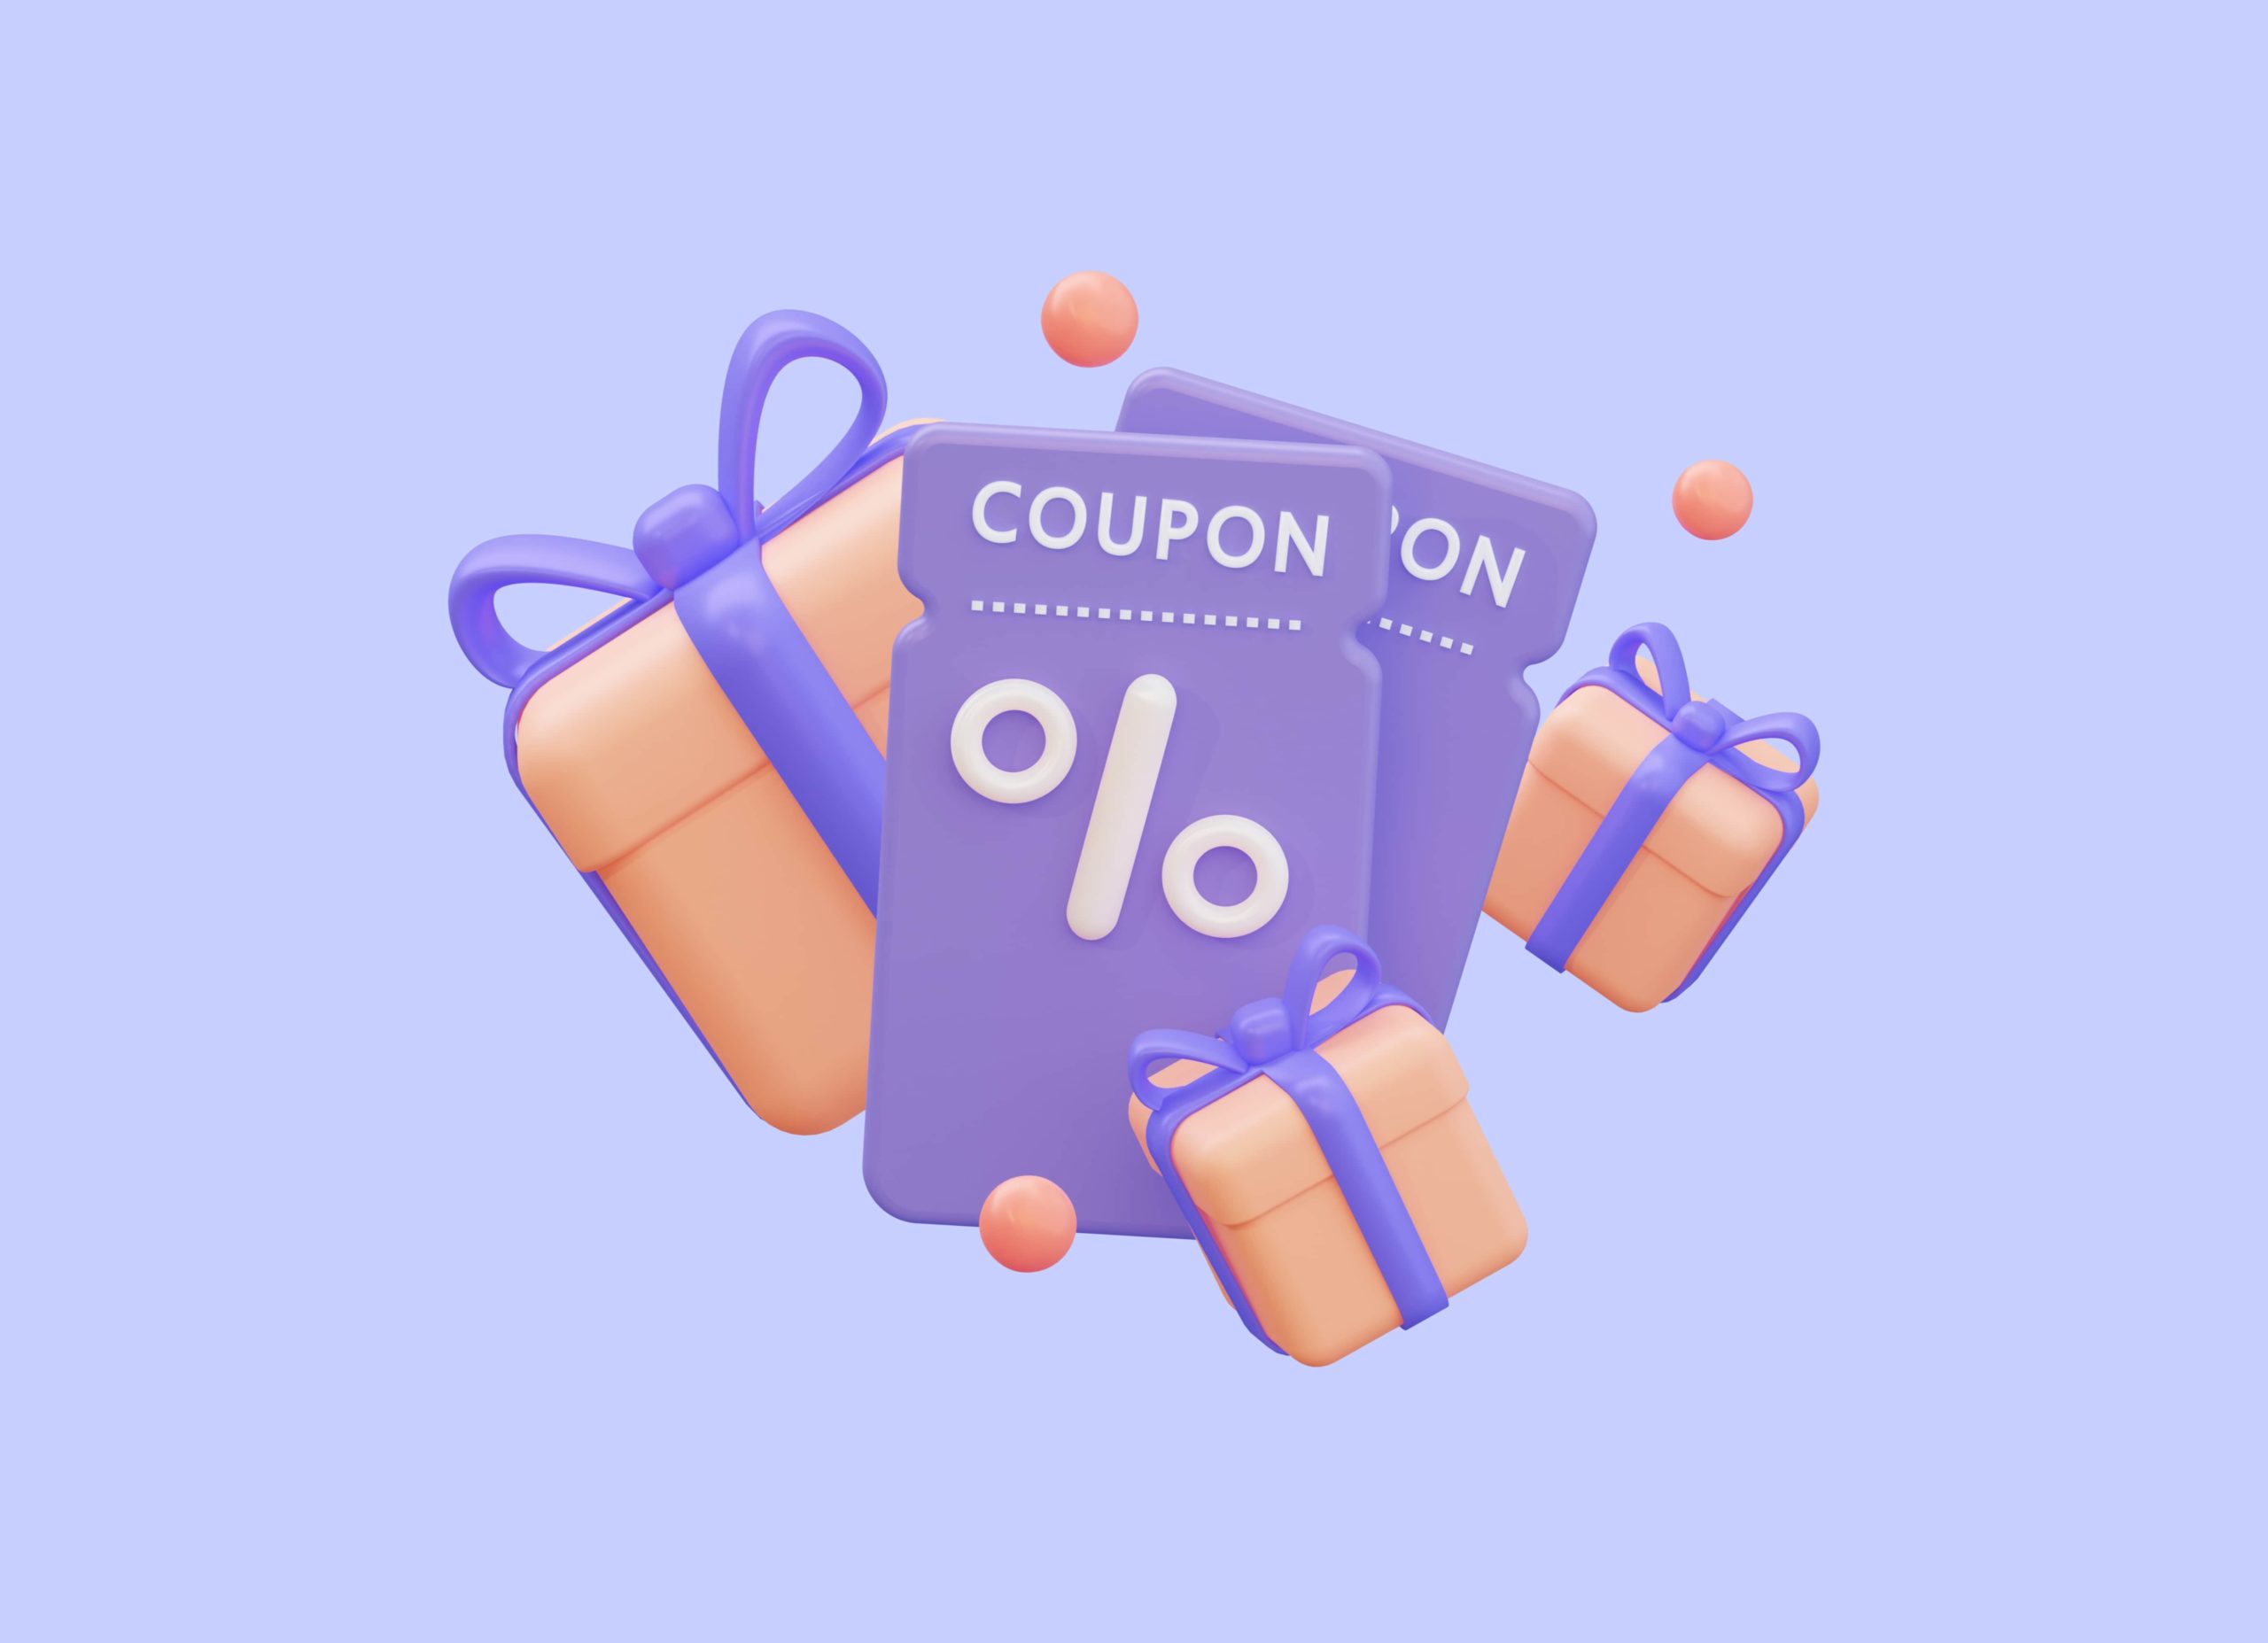 18 Discount Code Ideas to Get More Deals [+Examples]